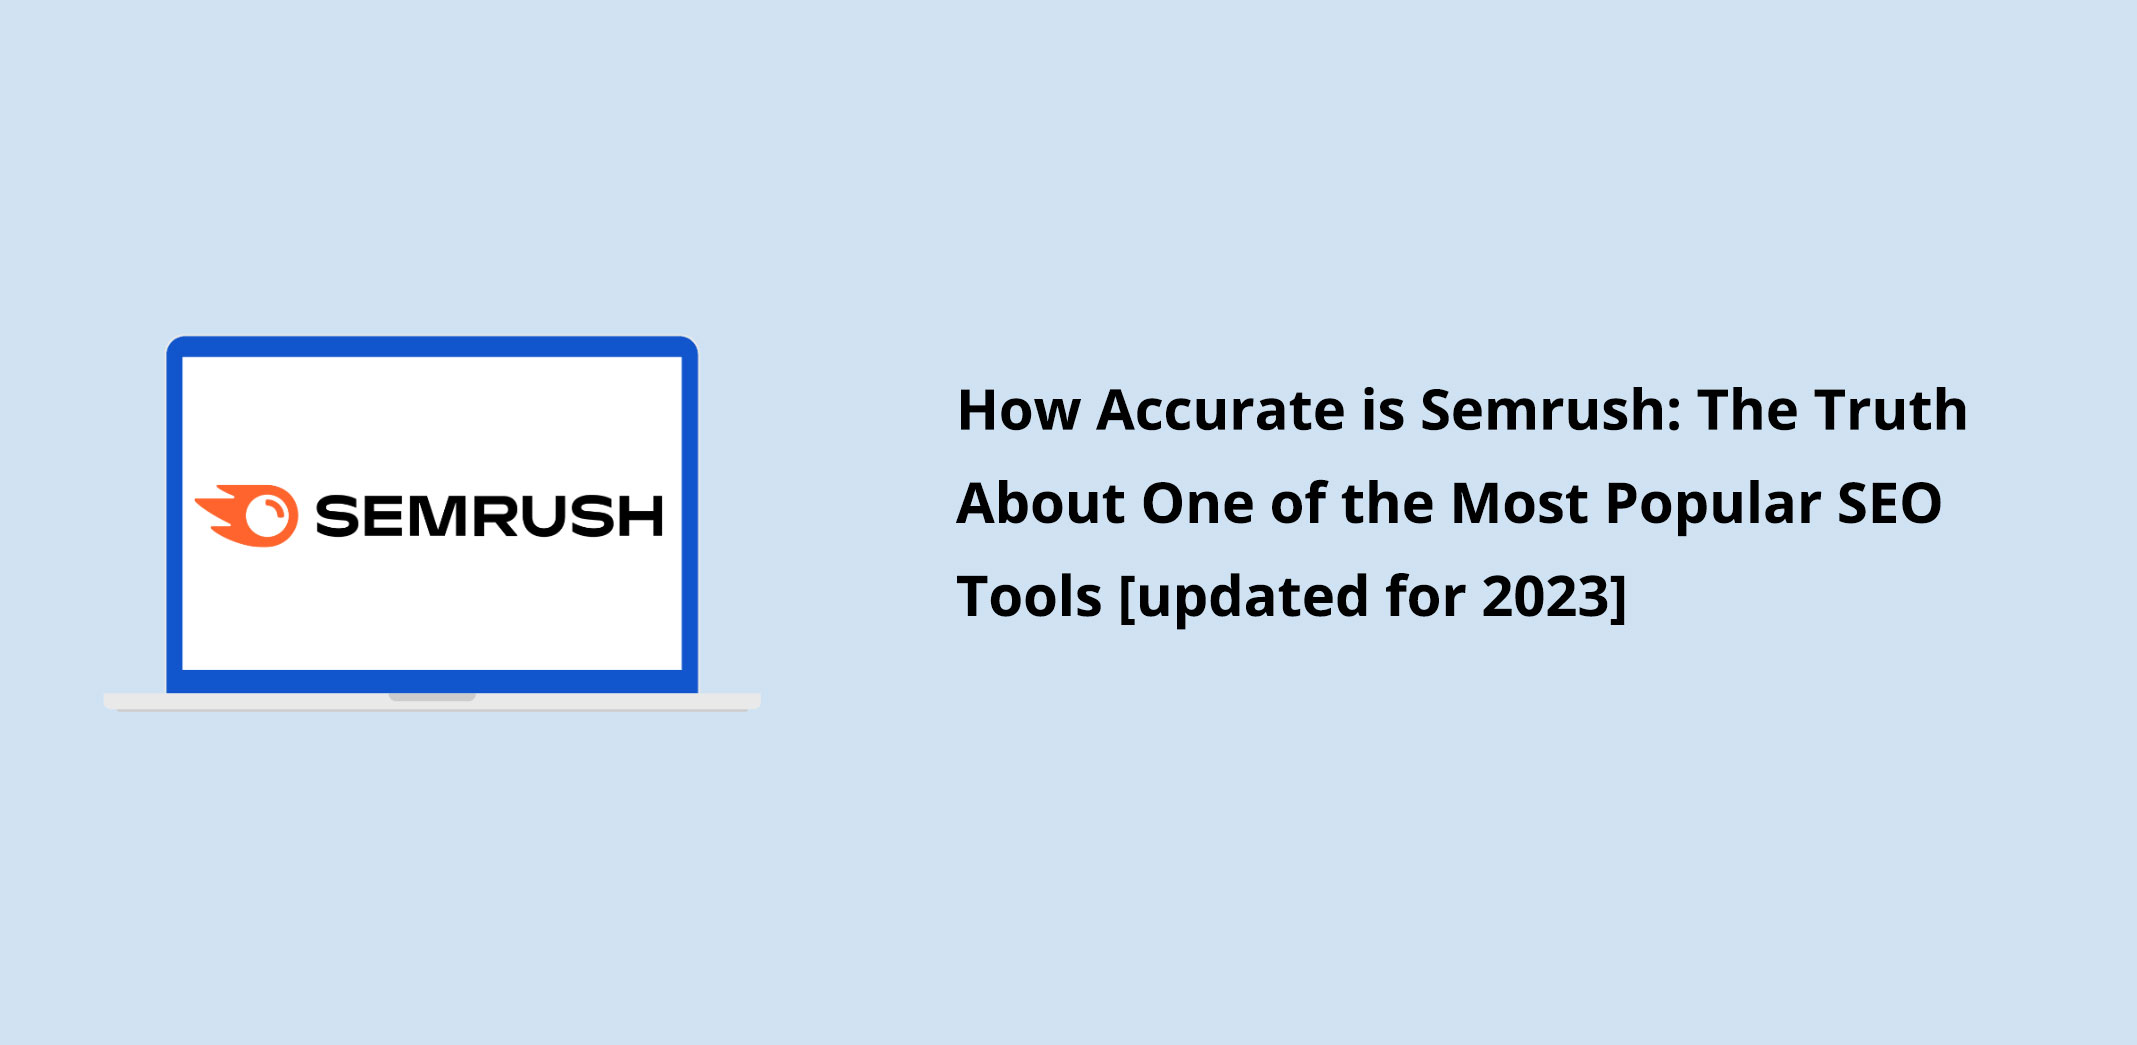 How Accurate is Semrush: The Truth About One of the Most Popular SEO Tools [updated for 2023]